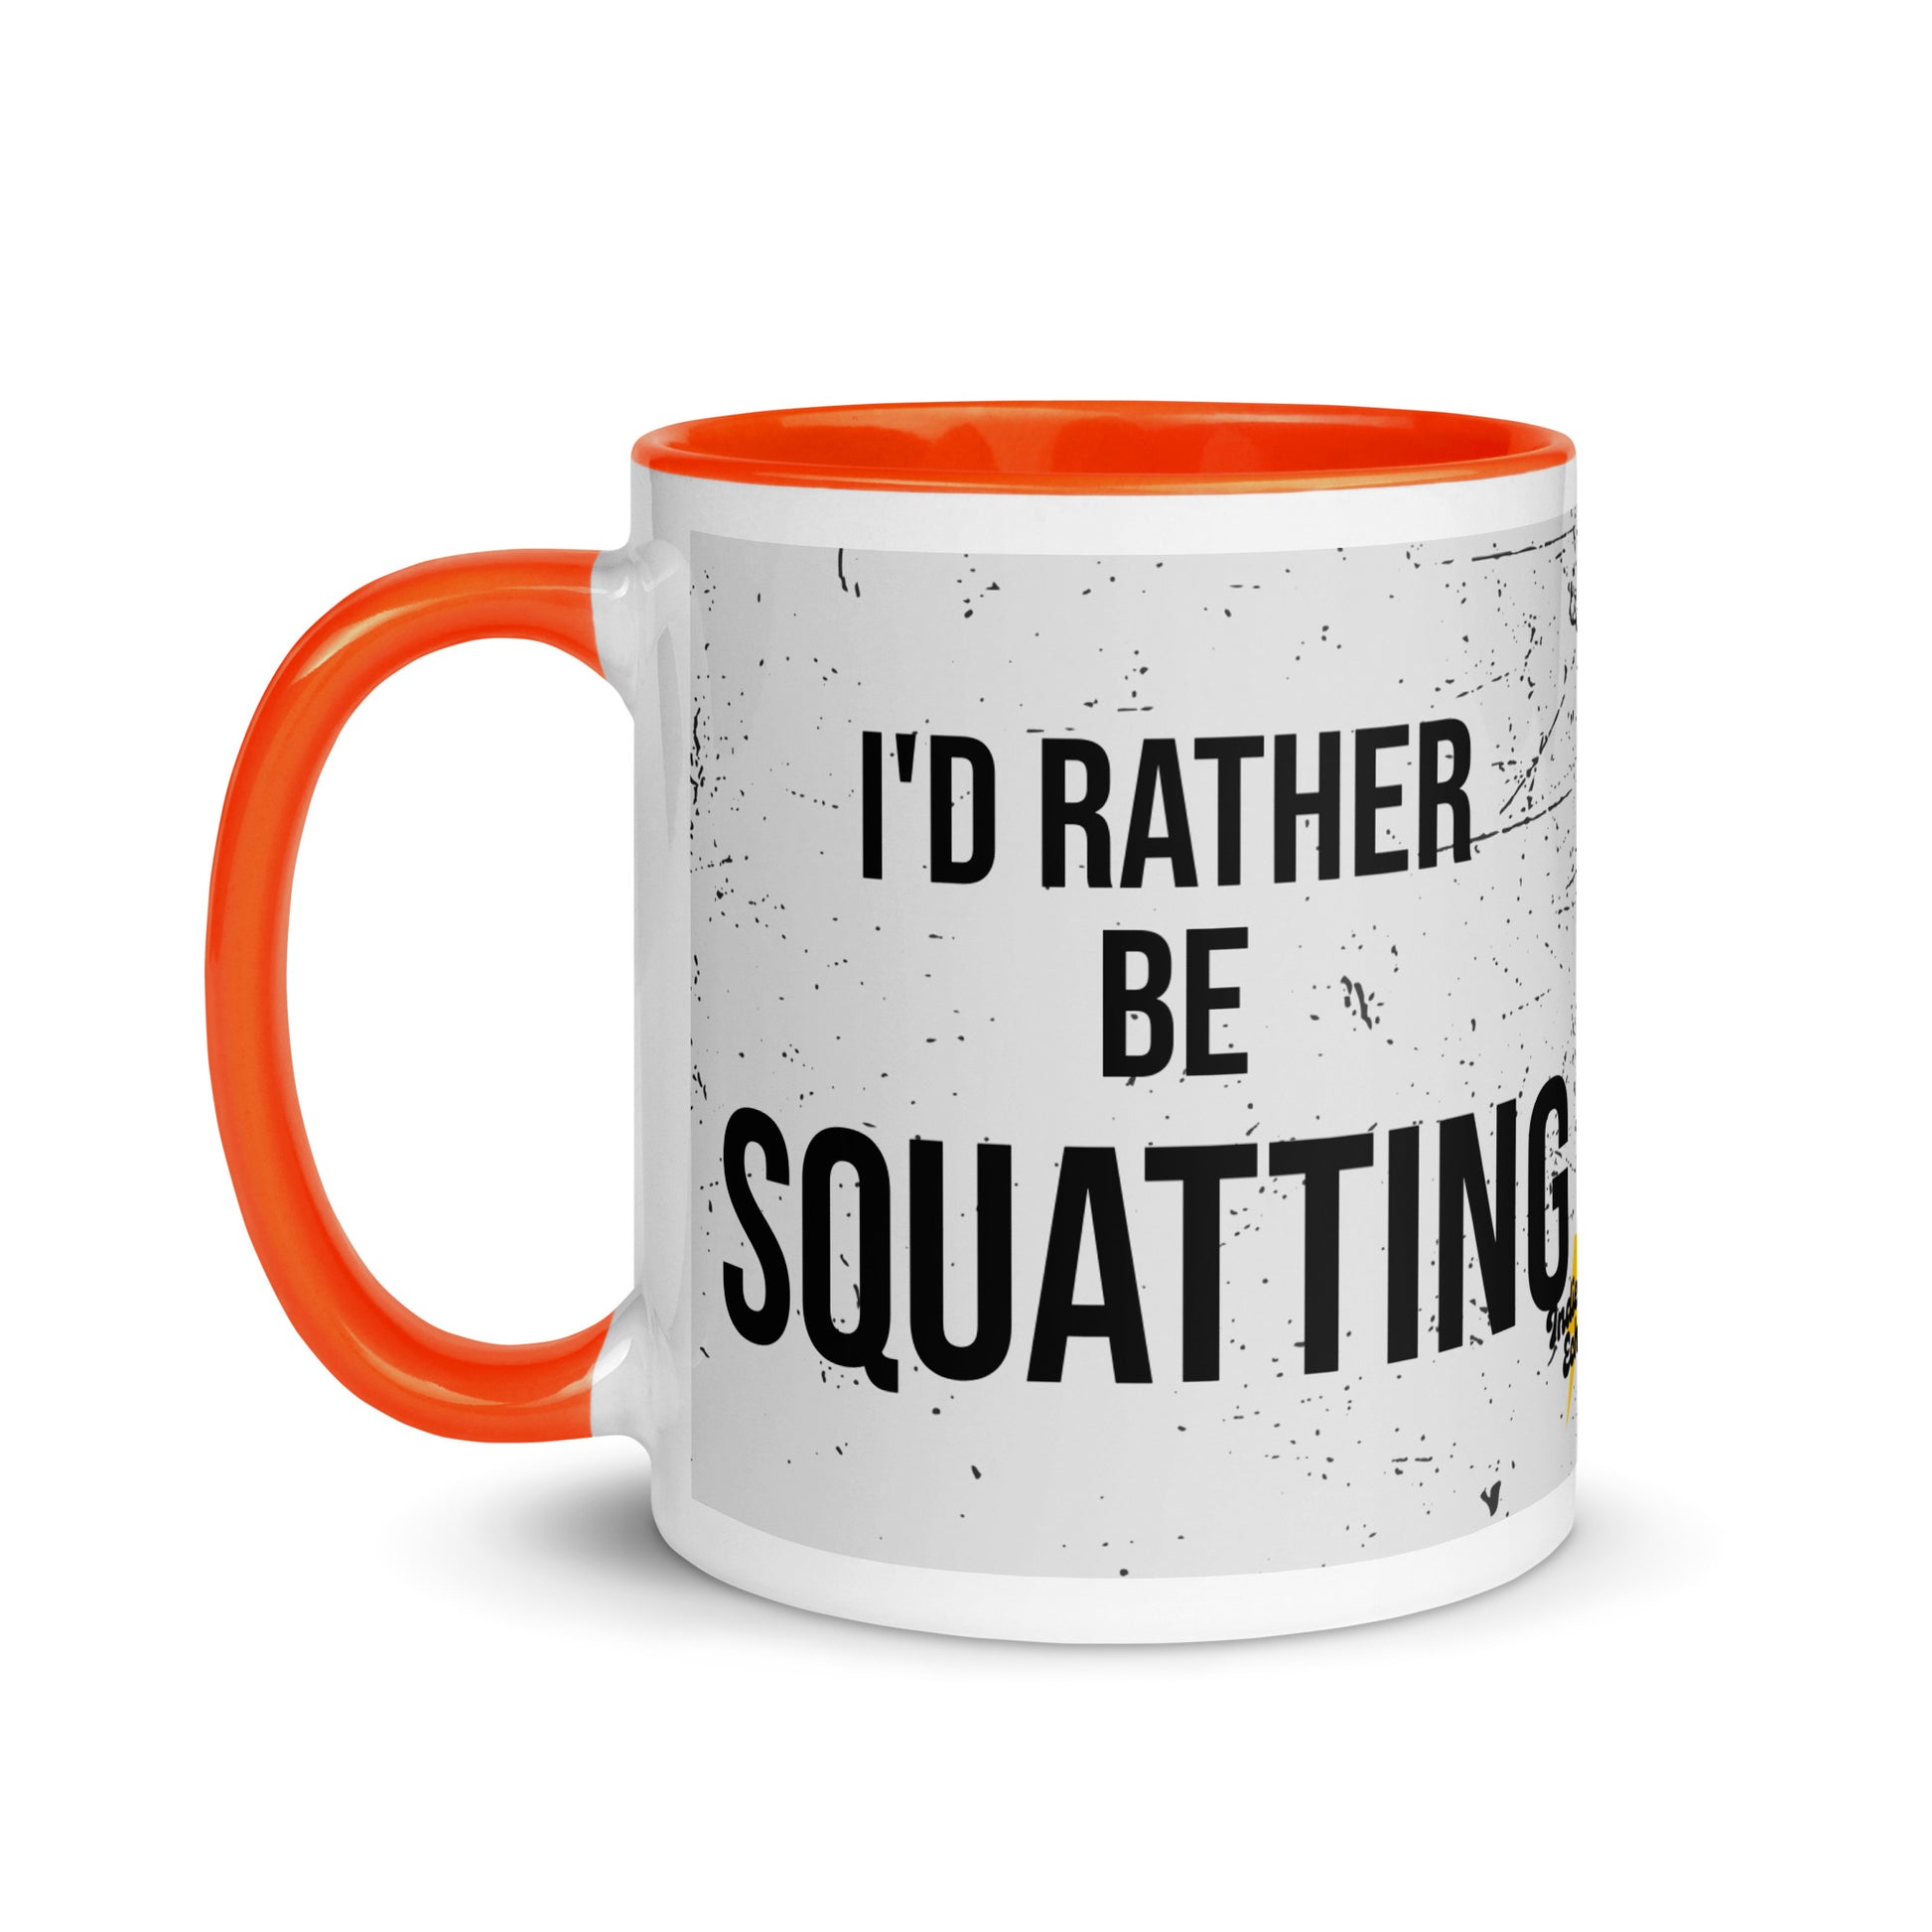 Orange handled mug with I'd rather be squatting written on it, across a grey splatter background. A gift for someone who loves the gym.